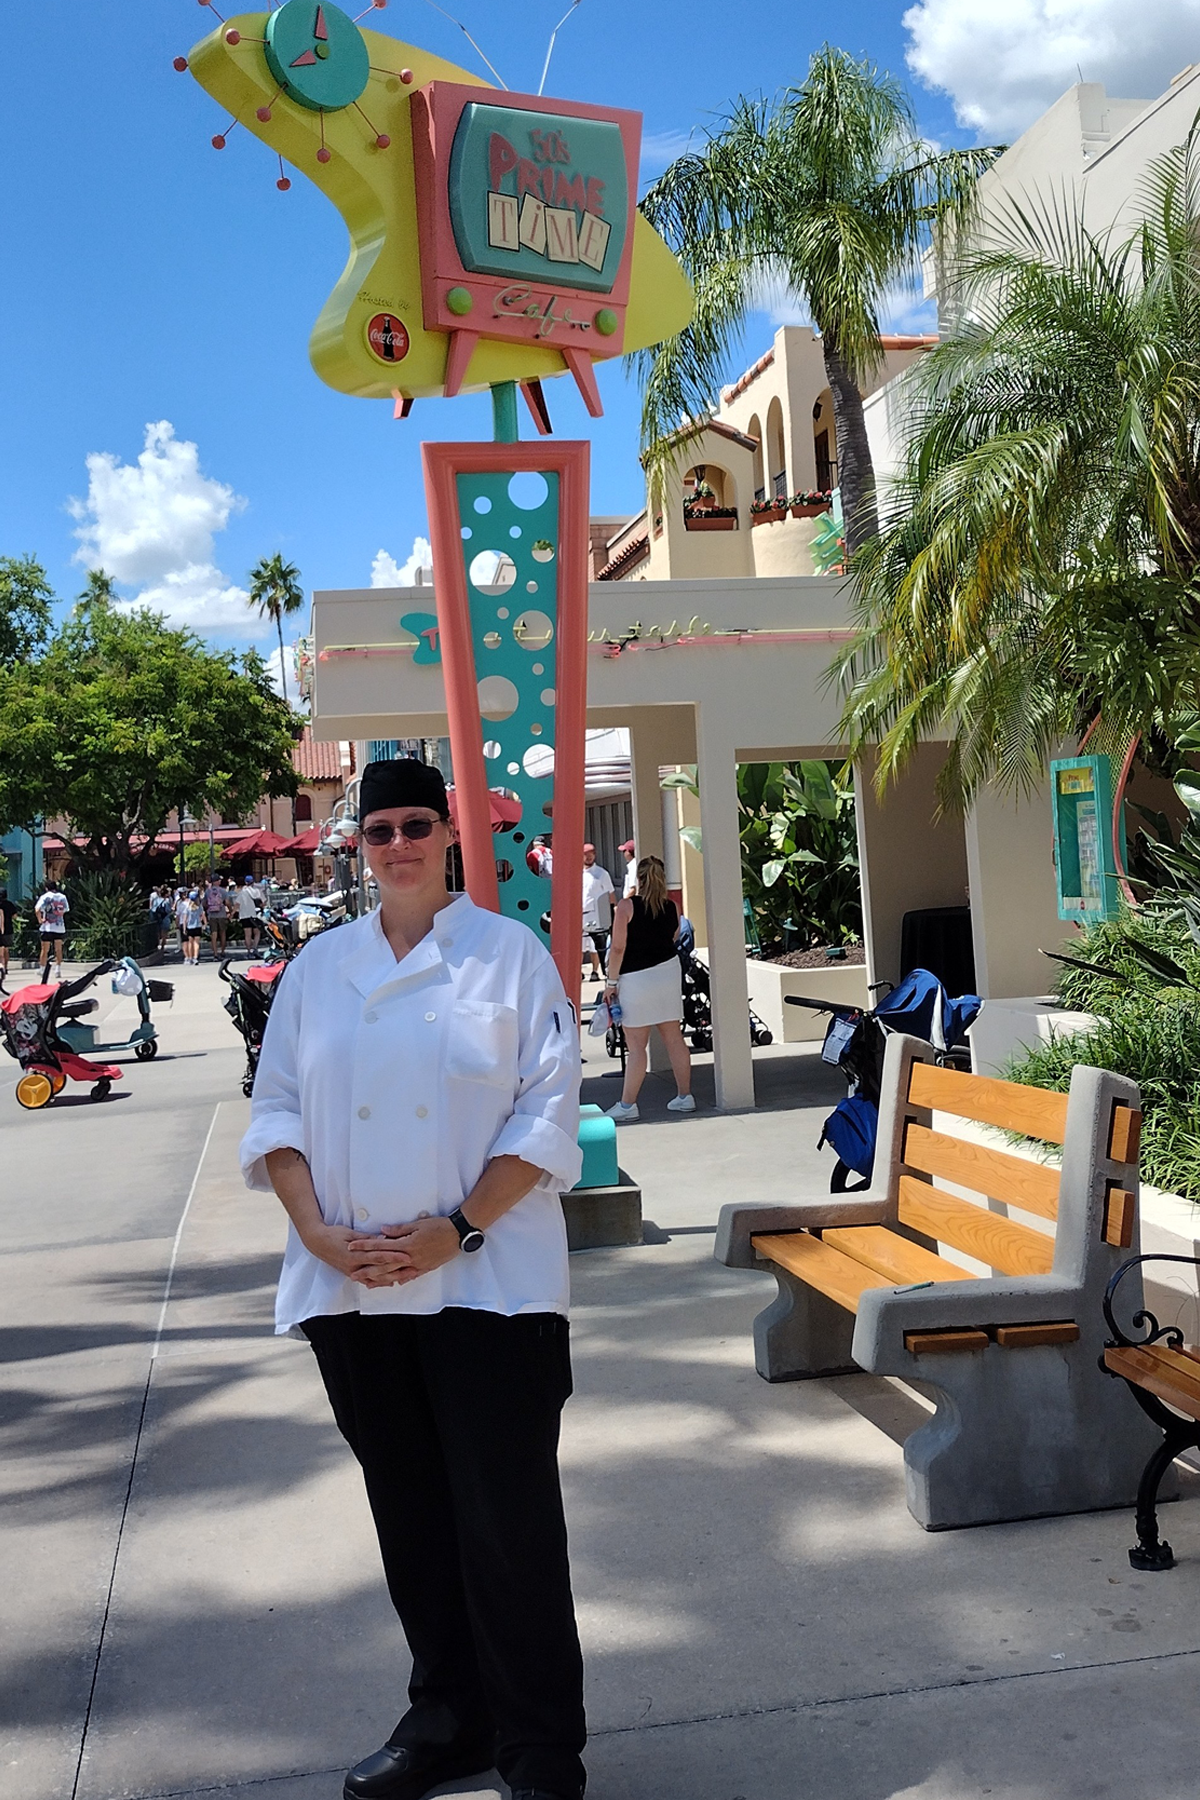 Betty Hassinger in her uniform, standing outside in front of restaurant at Disney